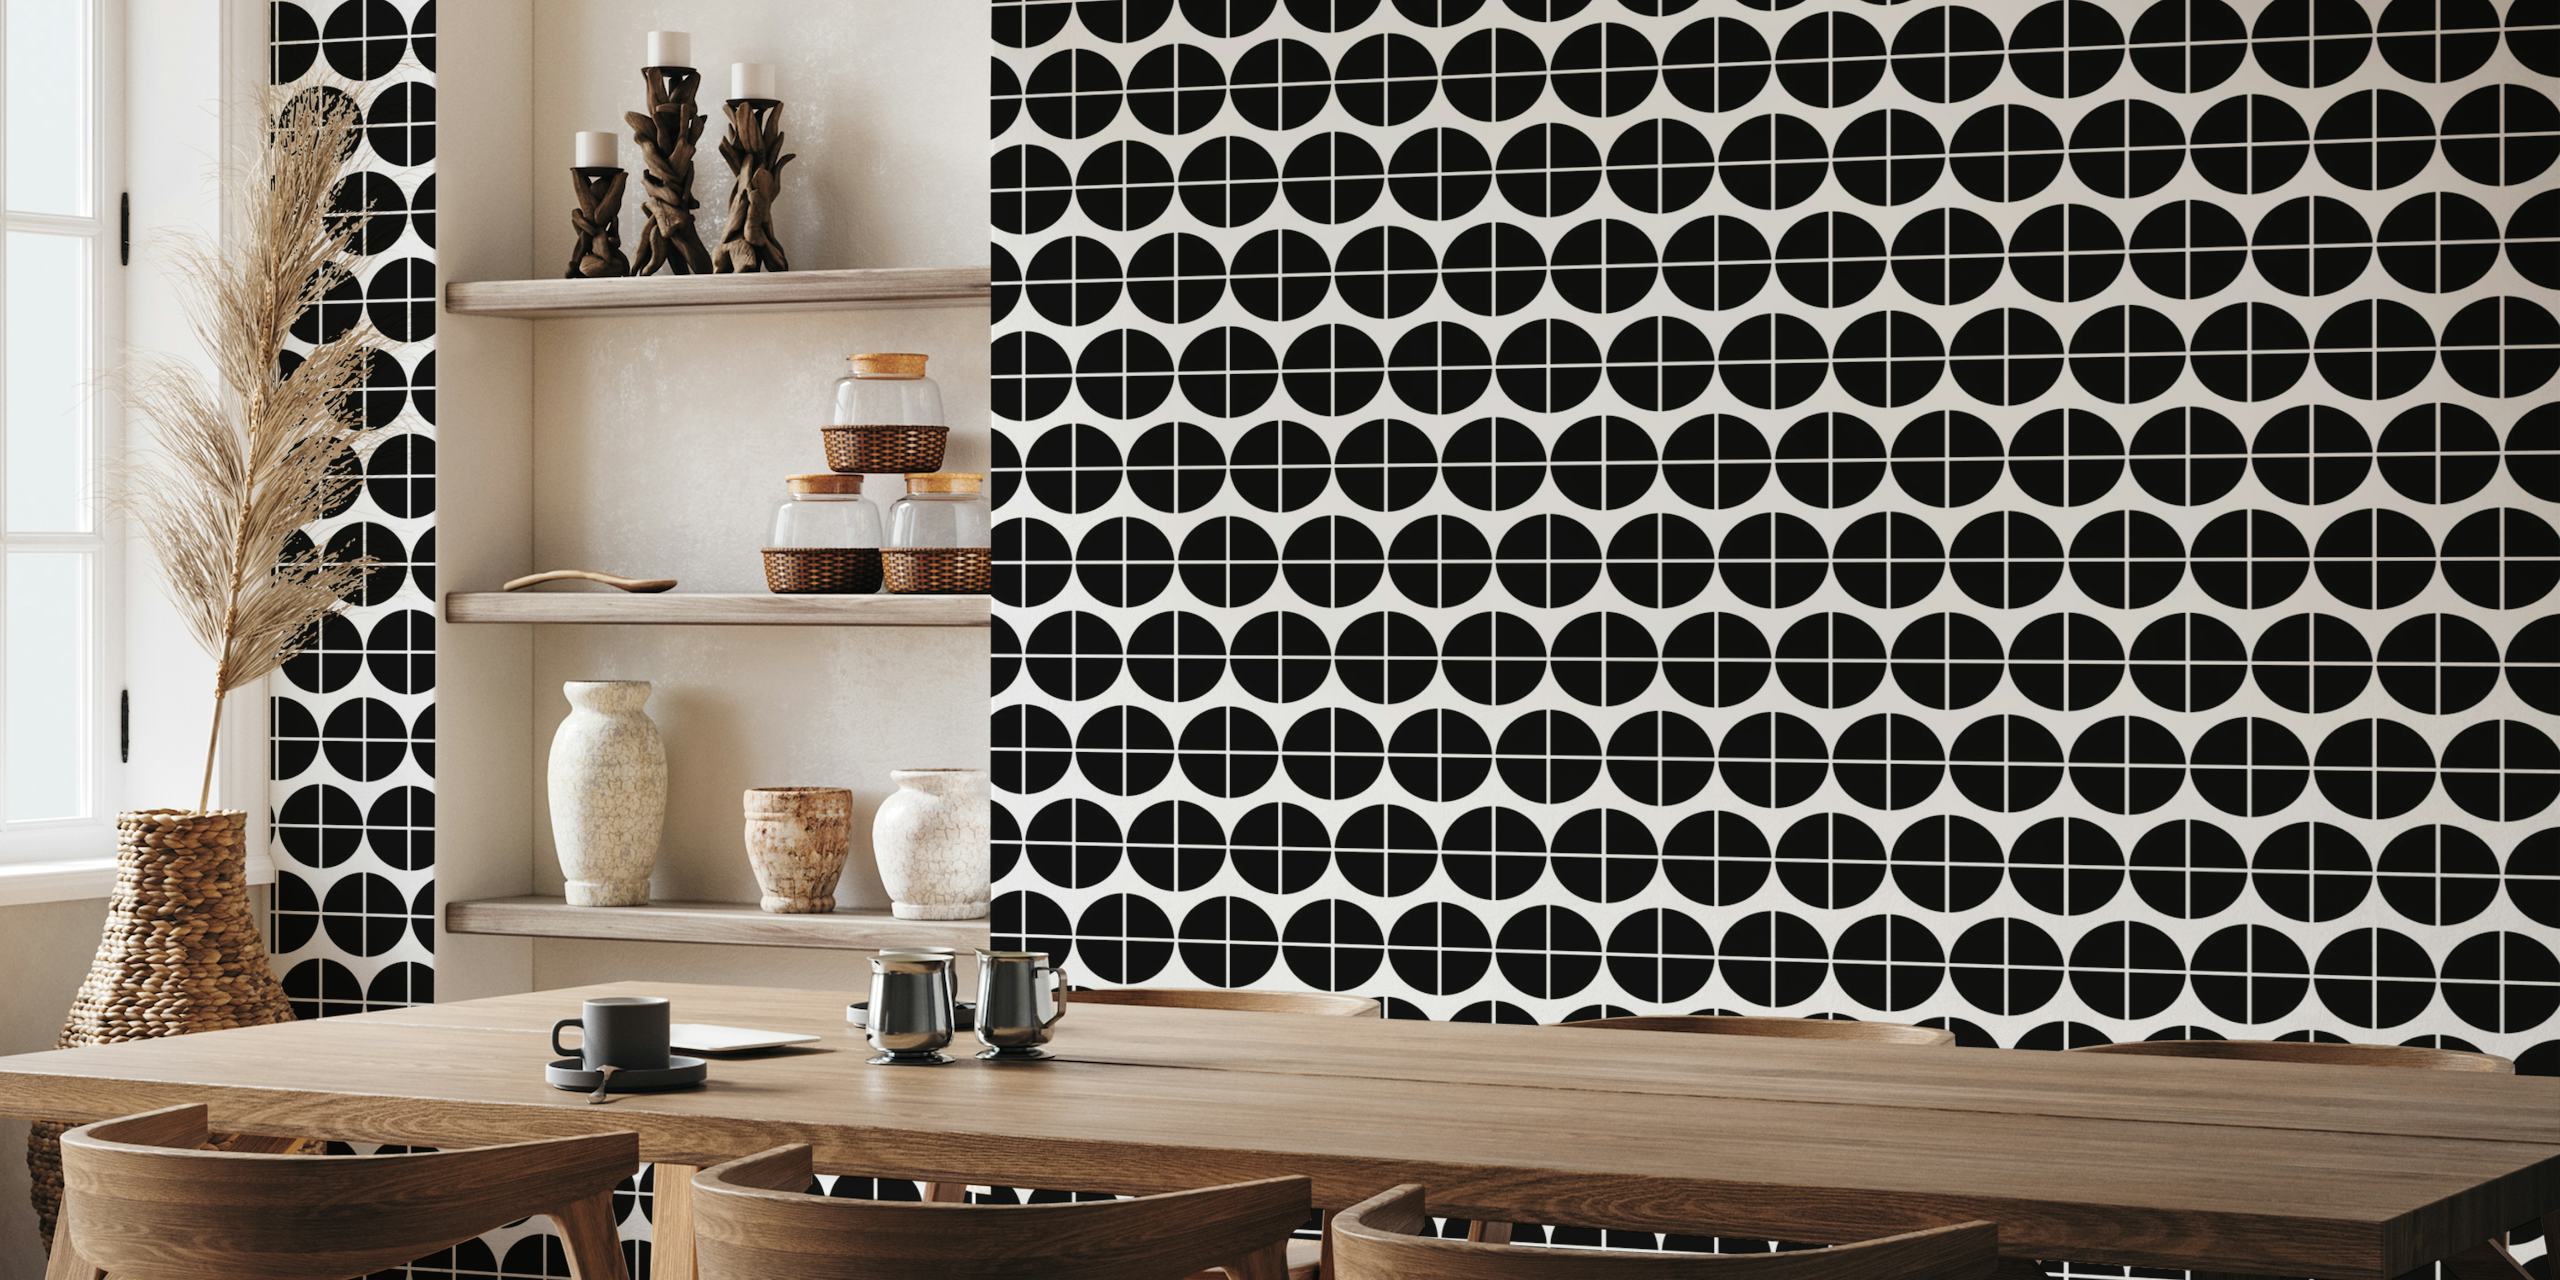 Black dots on a white background wall mural